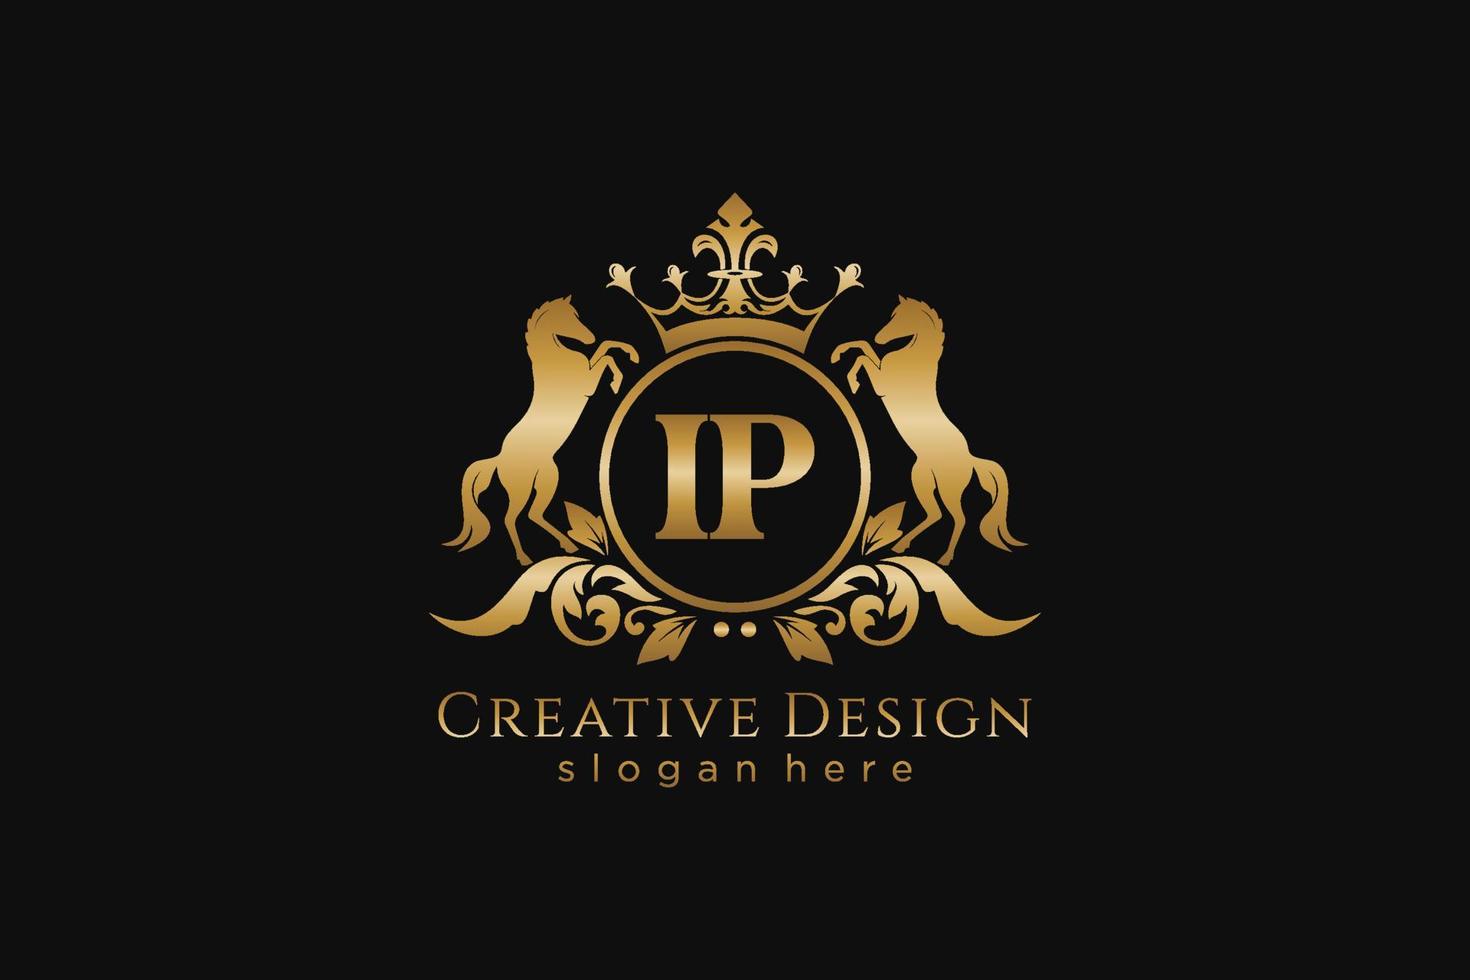 initial IP Retro golden crest with circle and two horses, badge template with scrolls and royal crown - perfect for luxurious branding projects vector